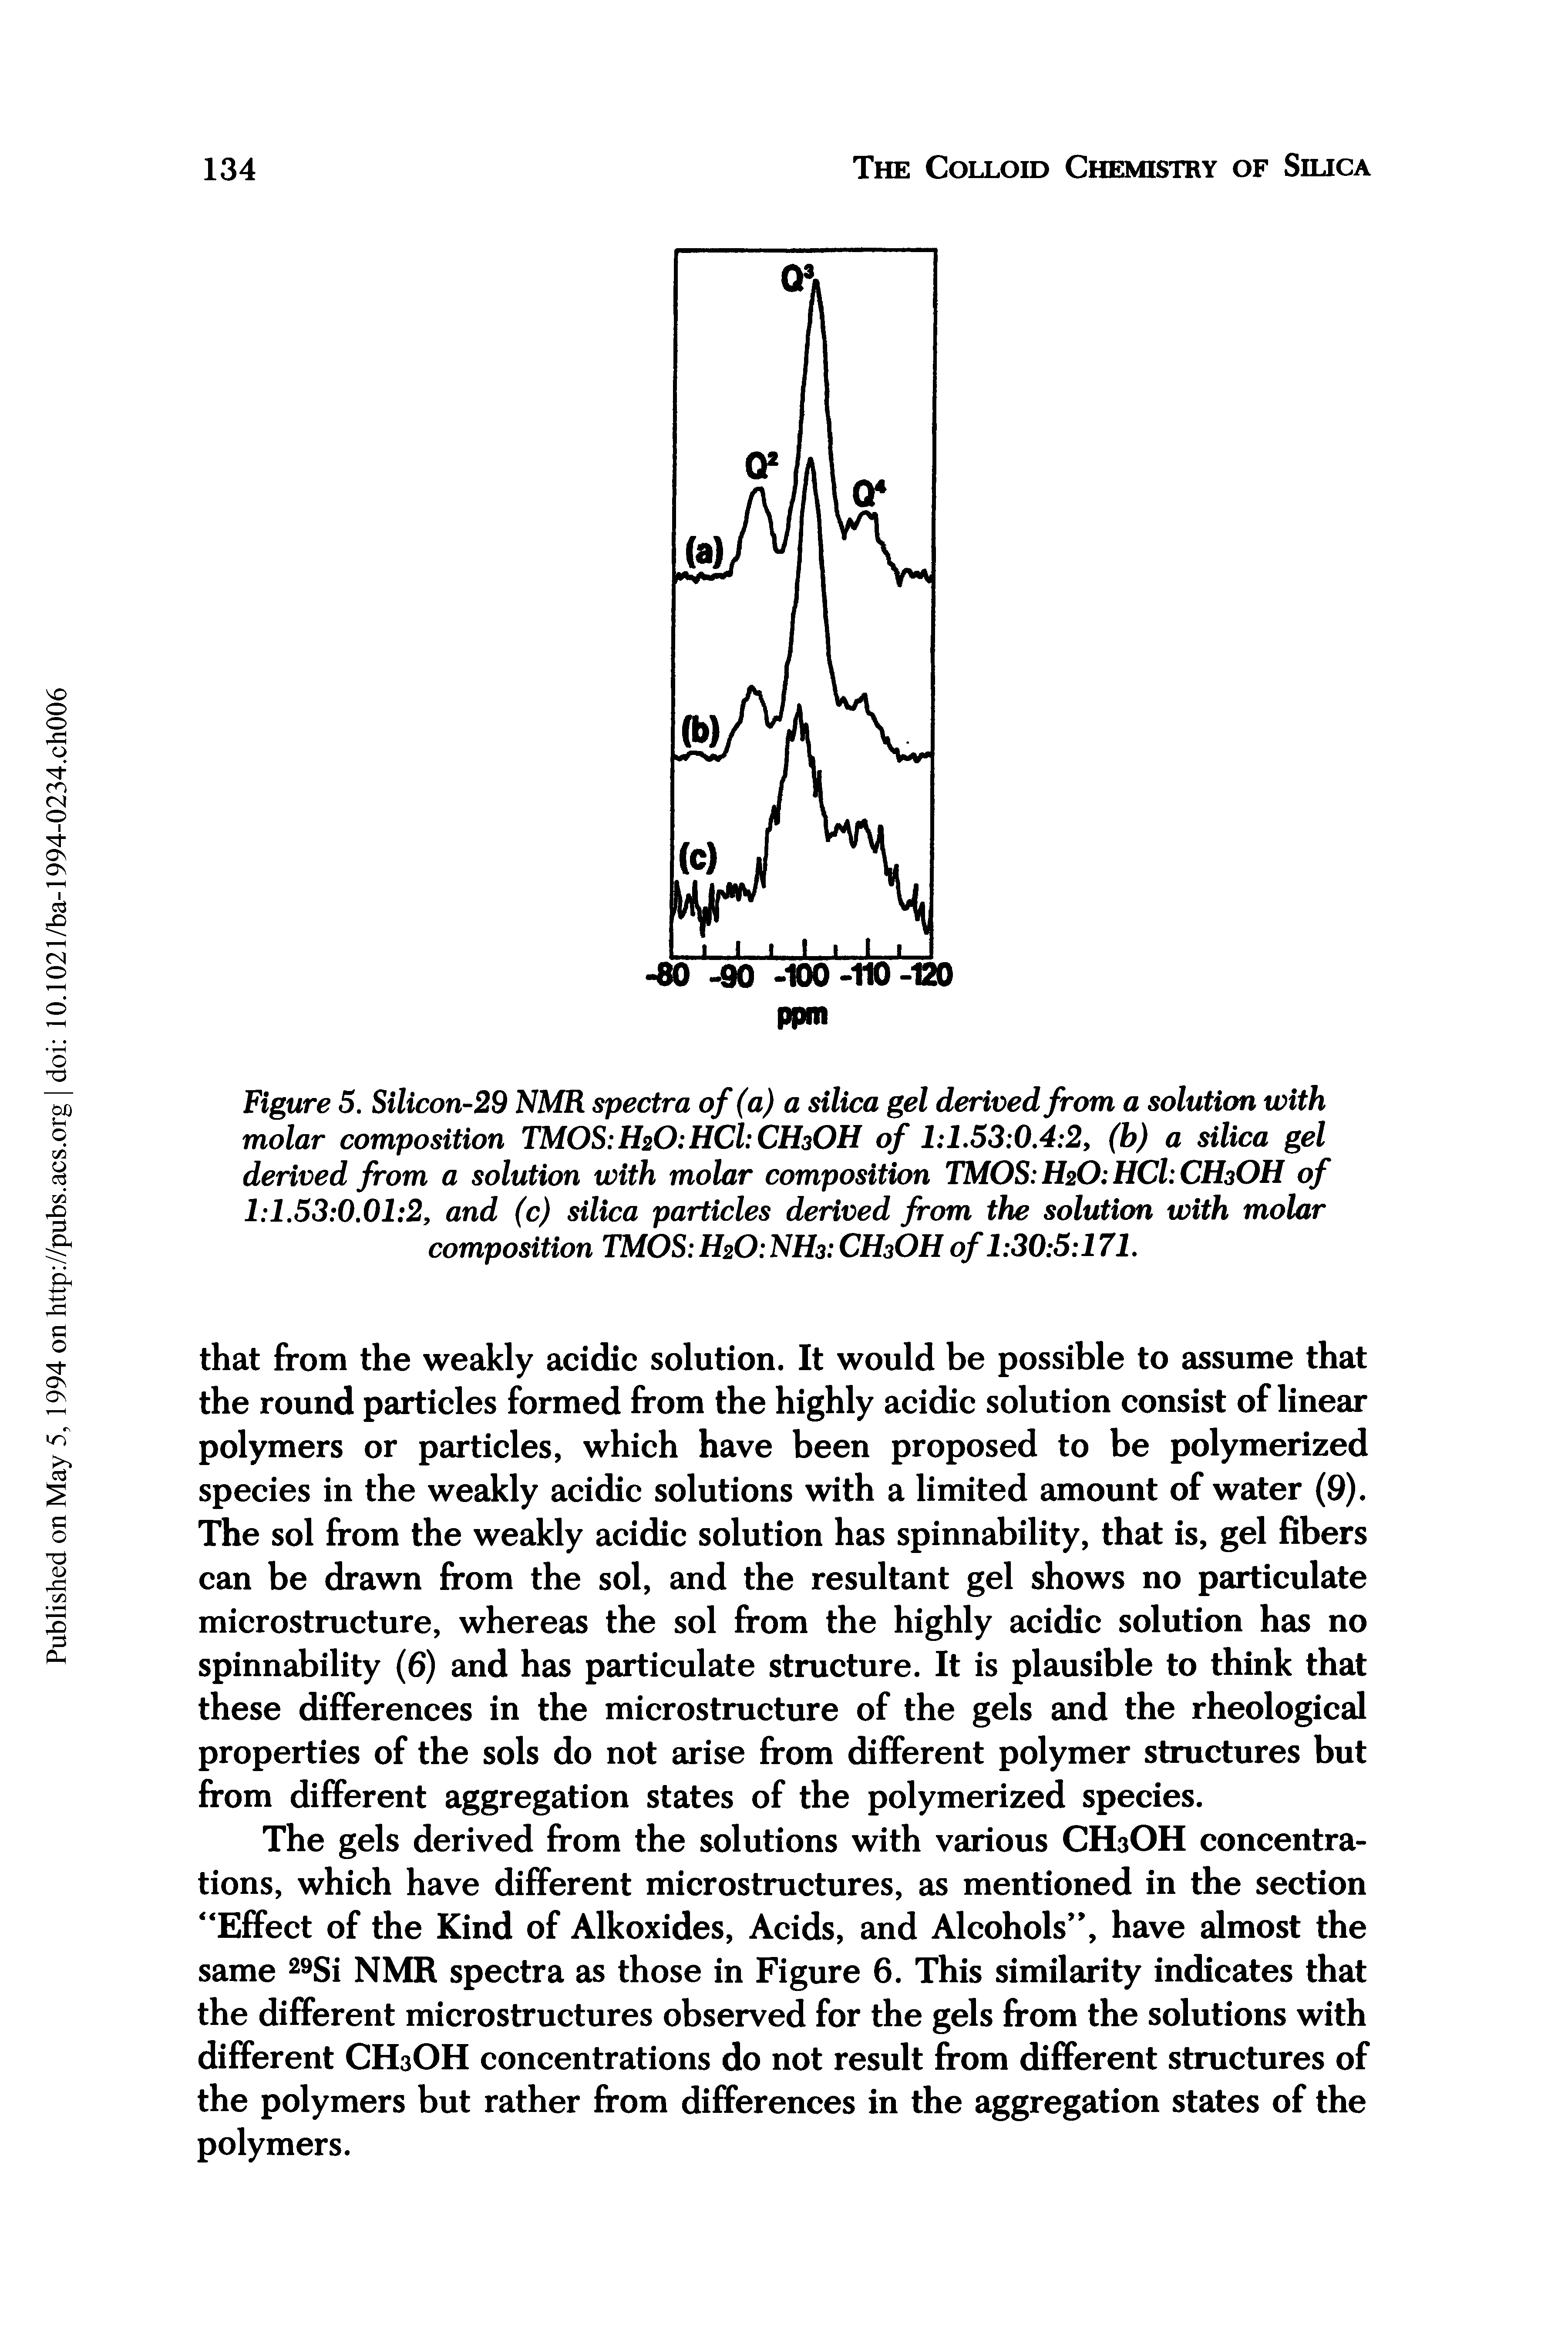 Figure 5. Silicon-29 NMR spectra of (a) a silica gel derived from a solution with molar composition TMOS H2O HCl CH3OH of 1 1.53 0.4 2, (b) a silica gel derived from a solution with molar composition TMOS H2O HCl CH3OH of 1 1.53 0.01 2, and (c) silica particles derived from the solution with molar composition TMOS H2O NH3 CH3OH of 1 30 5 171.